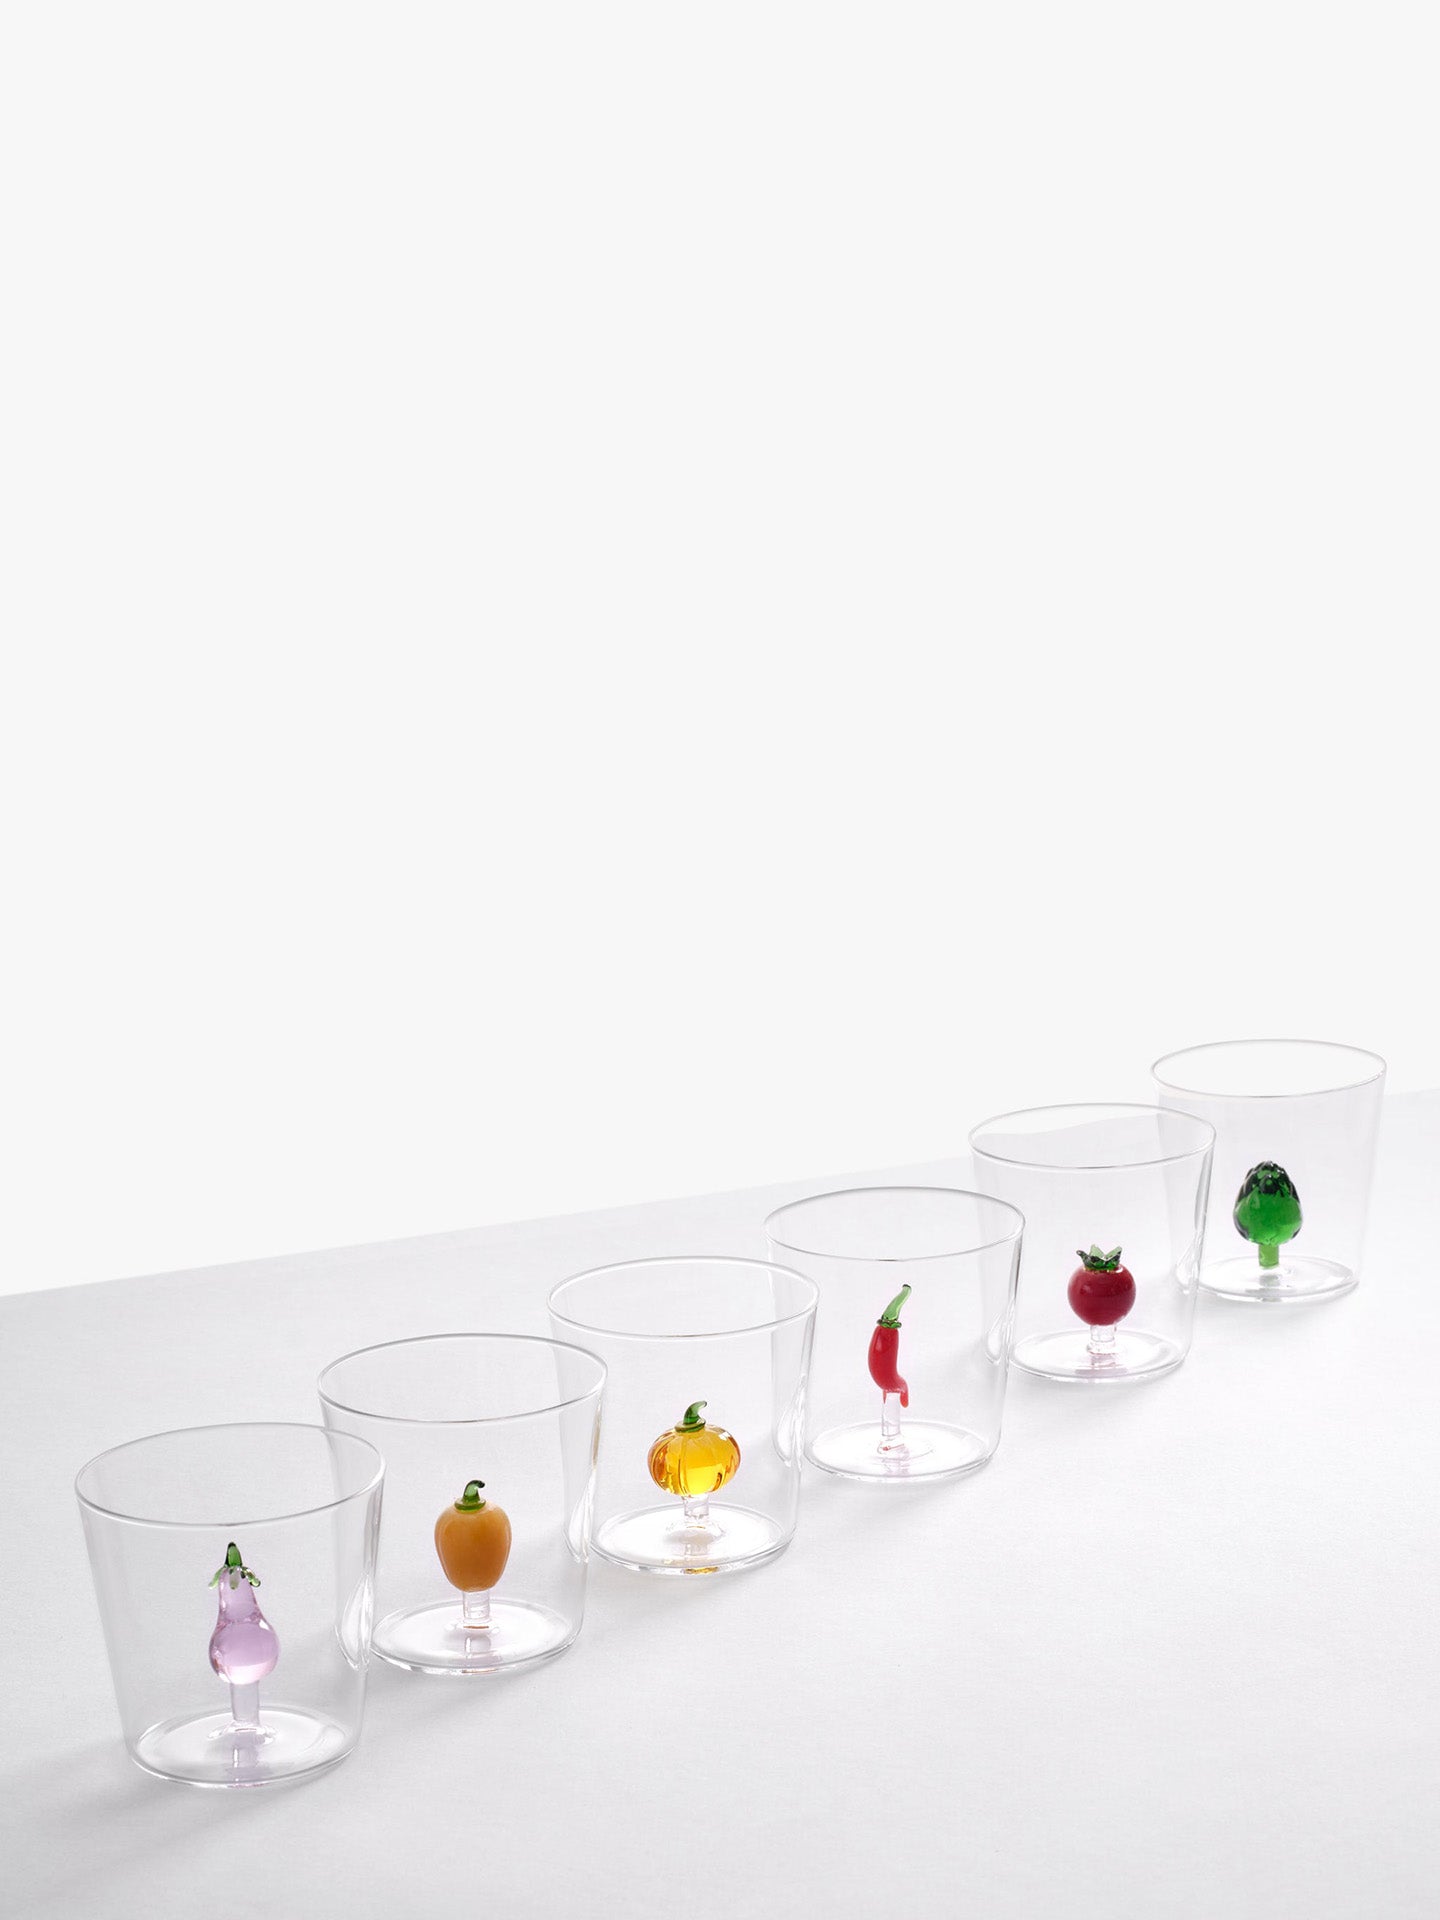 Tomato Glass Tumbler, Vegetables Collection